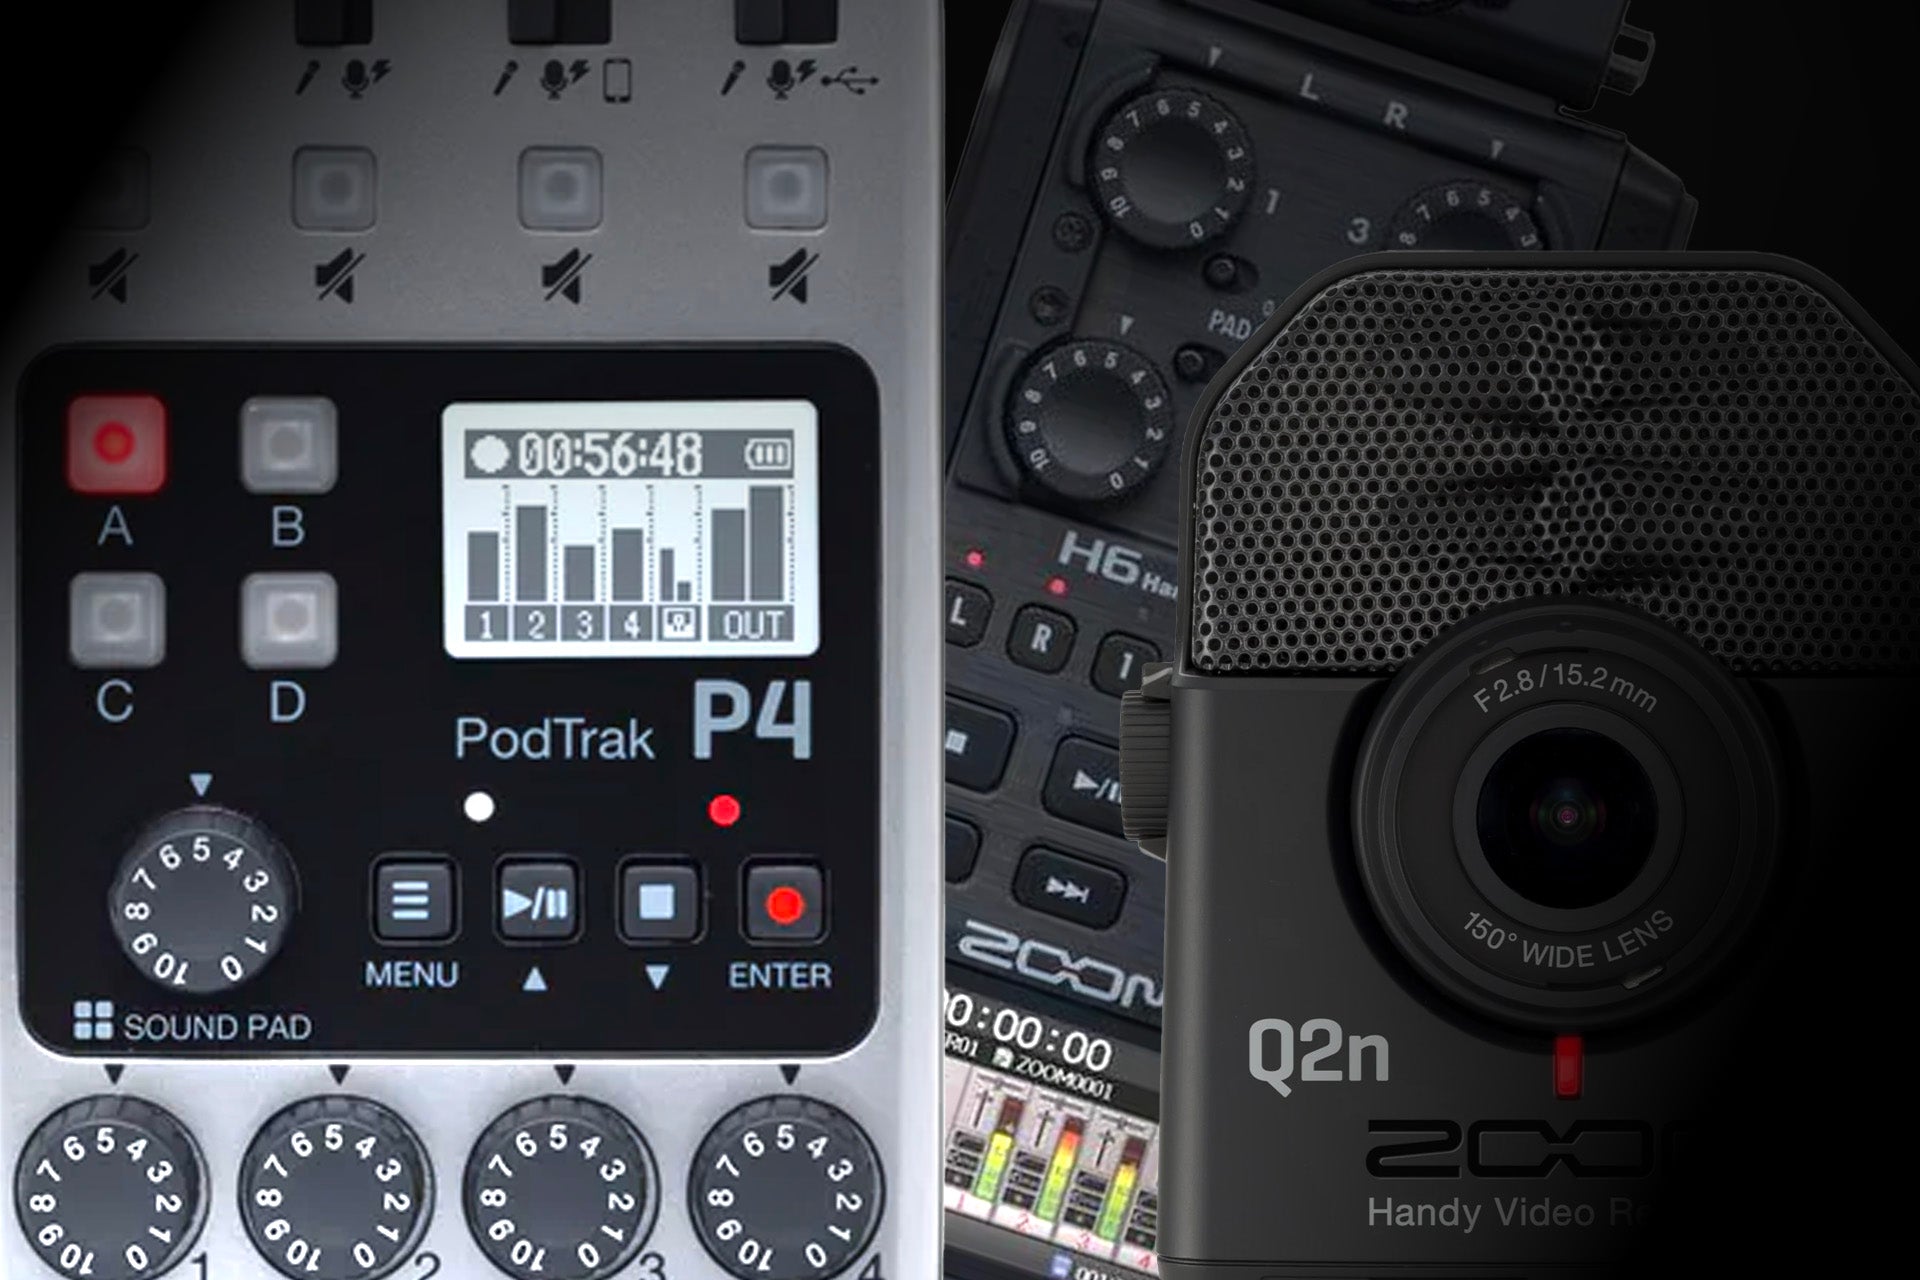 Zoom H6: The Ultimate Portable Recording Tool for Podcasters - The Podcast  Haven